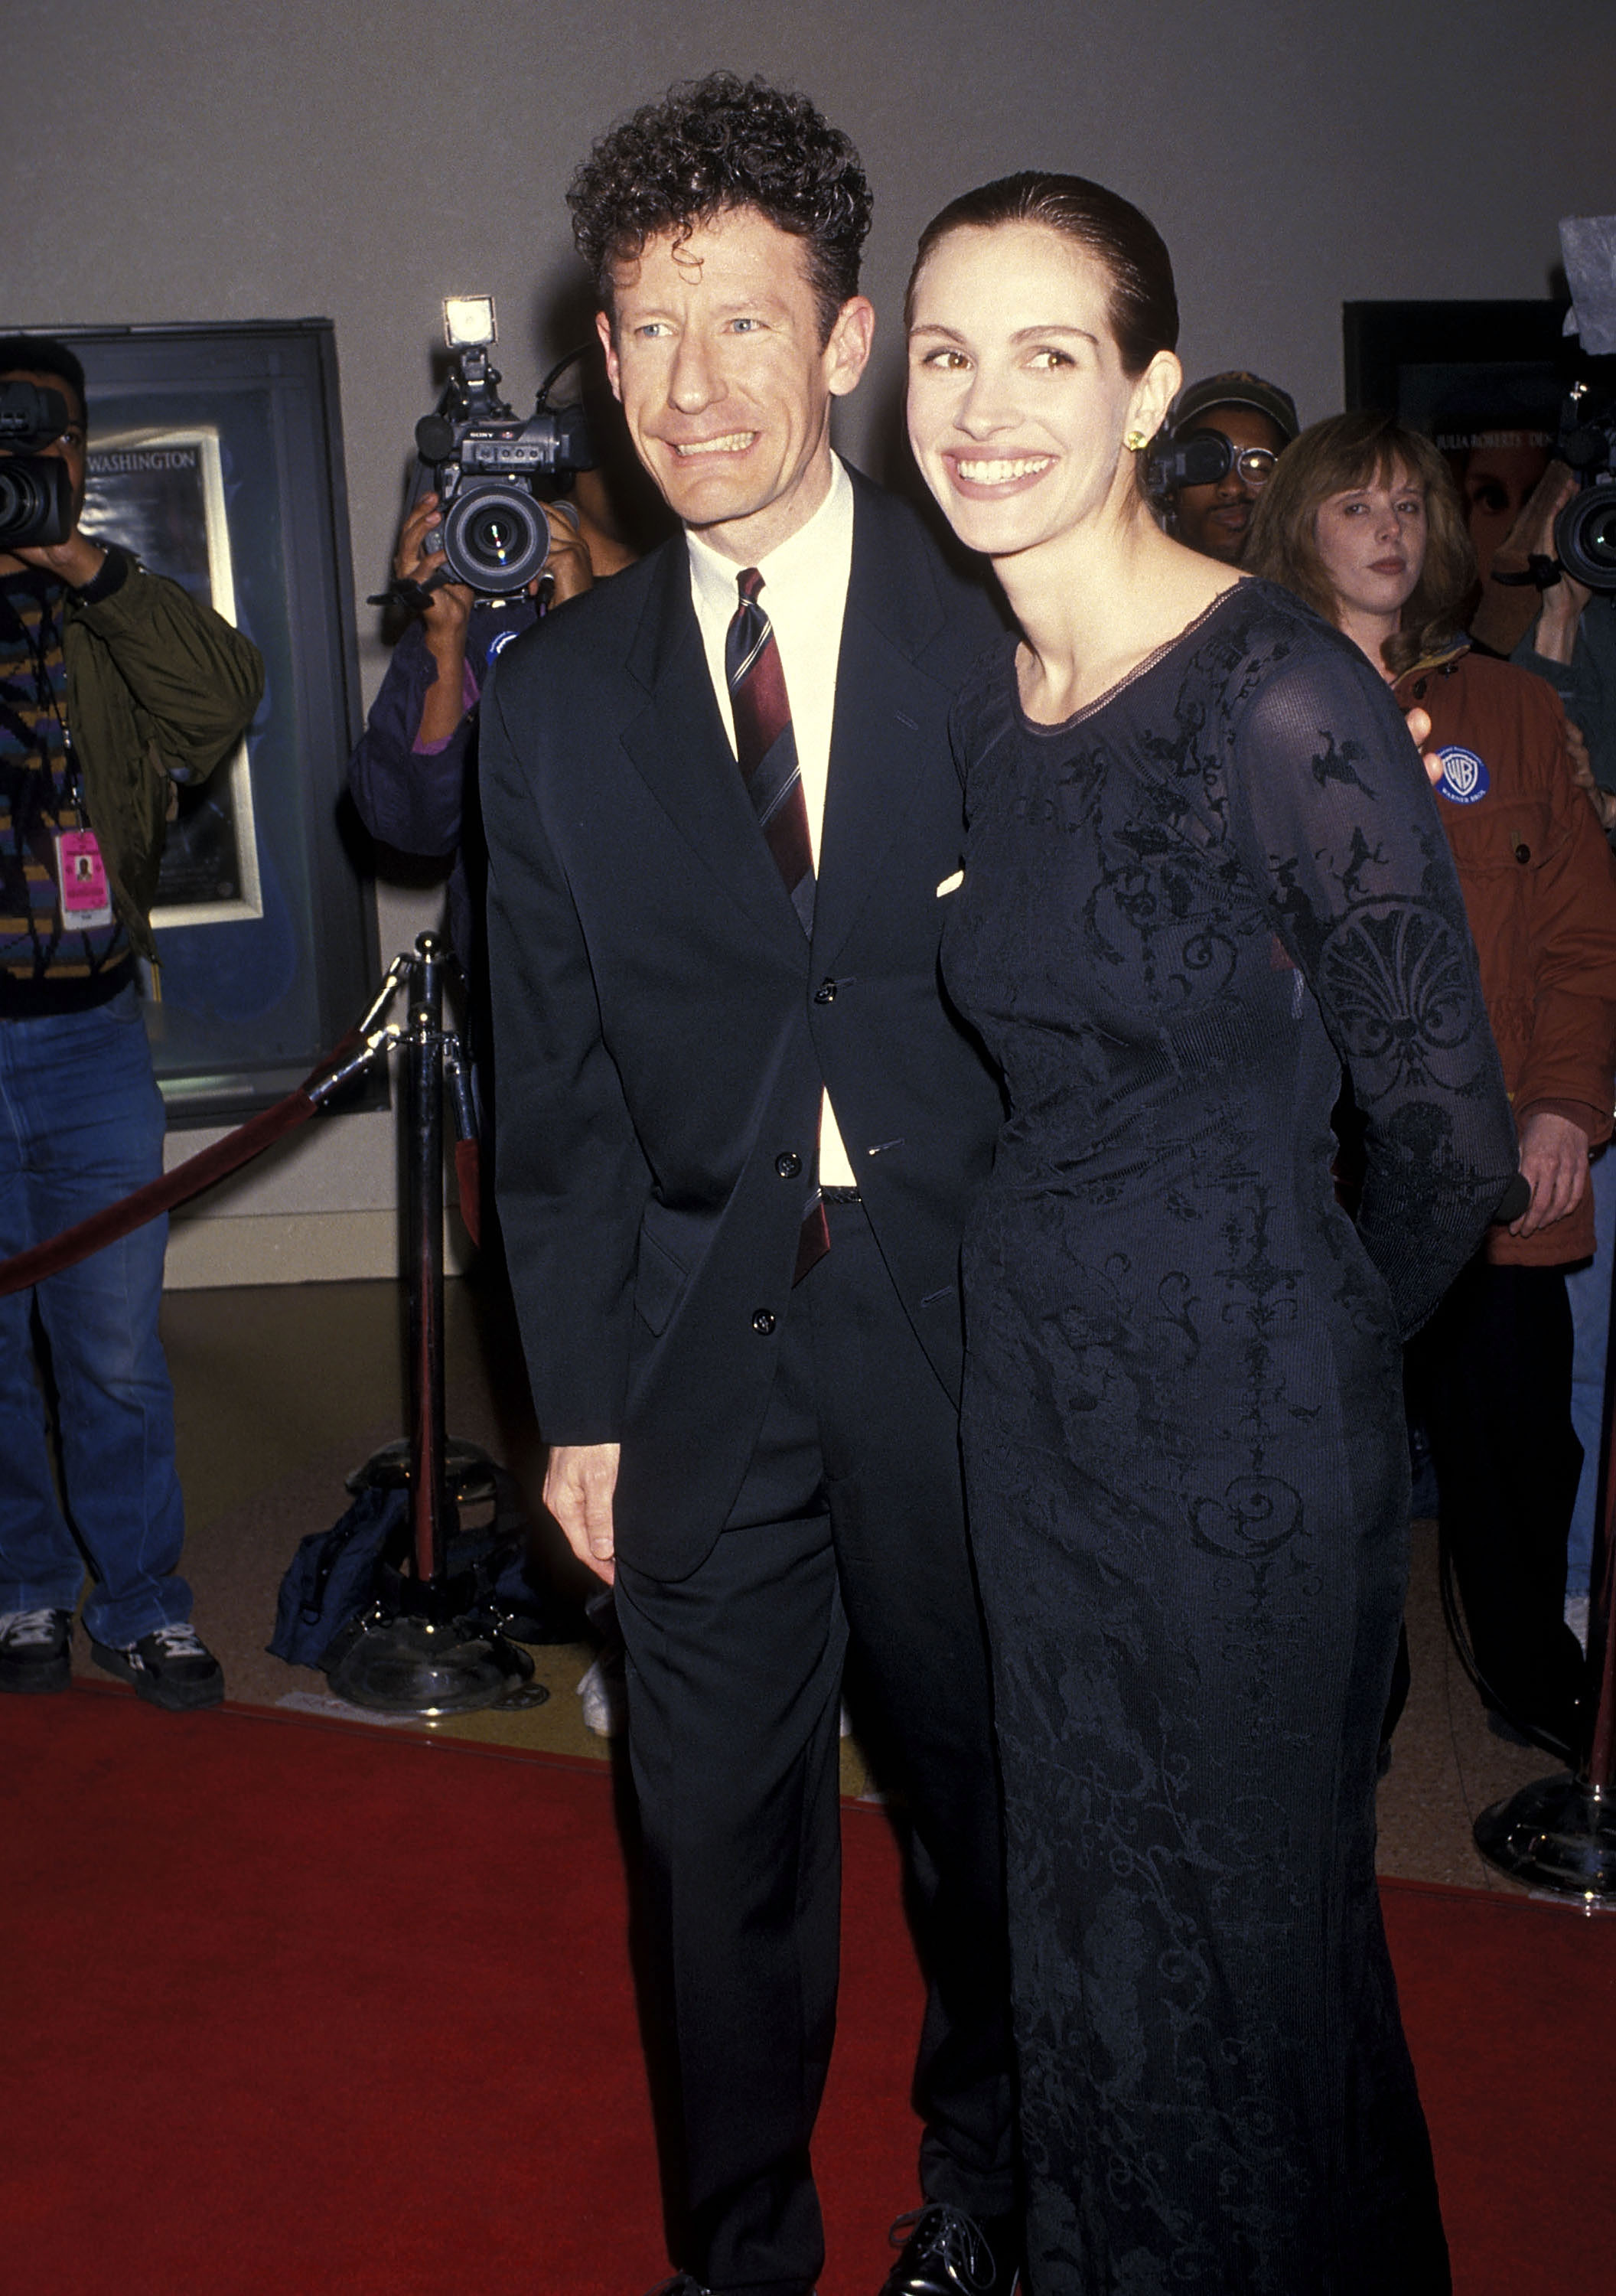 Lyle Lovett and Julia Roberts at "The Pelican Brief" premiere in Westwood, 1993 | Source: Getty Images